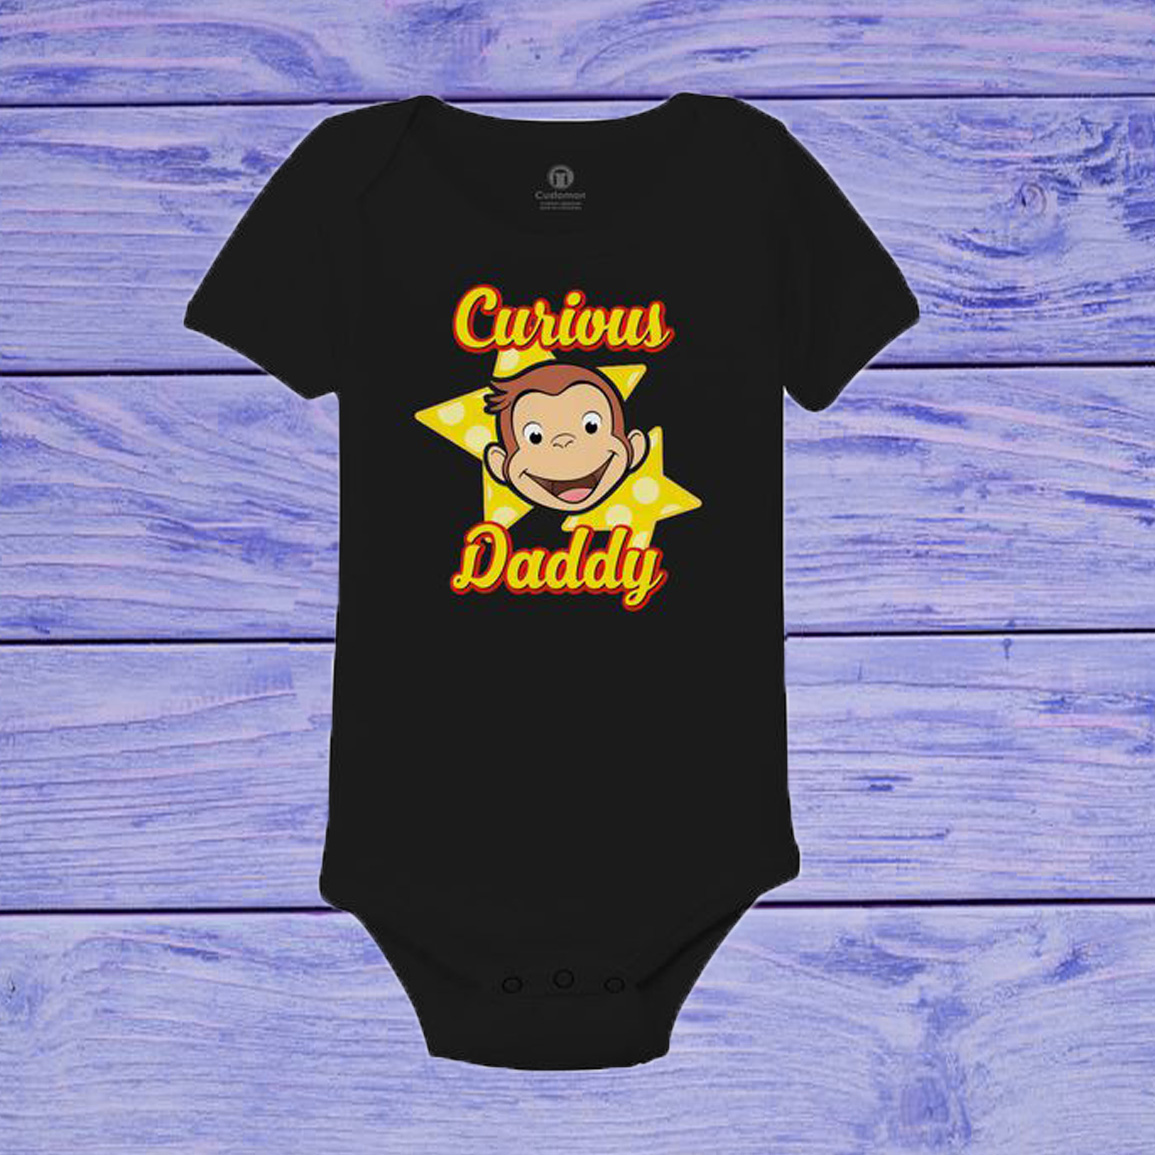 Customized Curious George Baby Onesie - Custom Baby Onesie - Cute Curious George Baby Suit - New Born Gift - Baby Shower Gift - Gift for Baby - Funny Animal